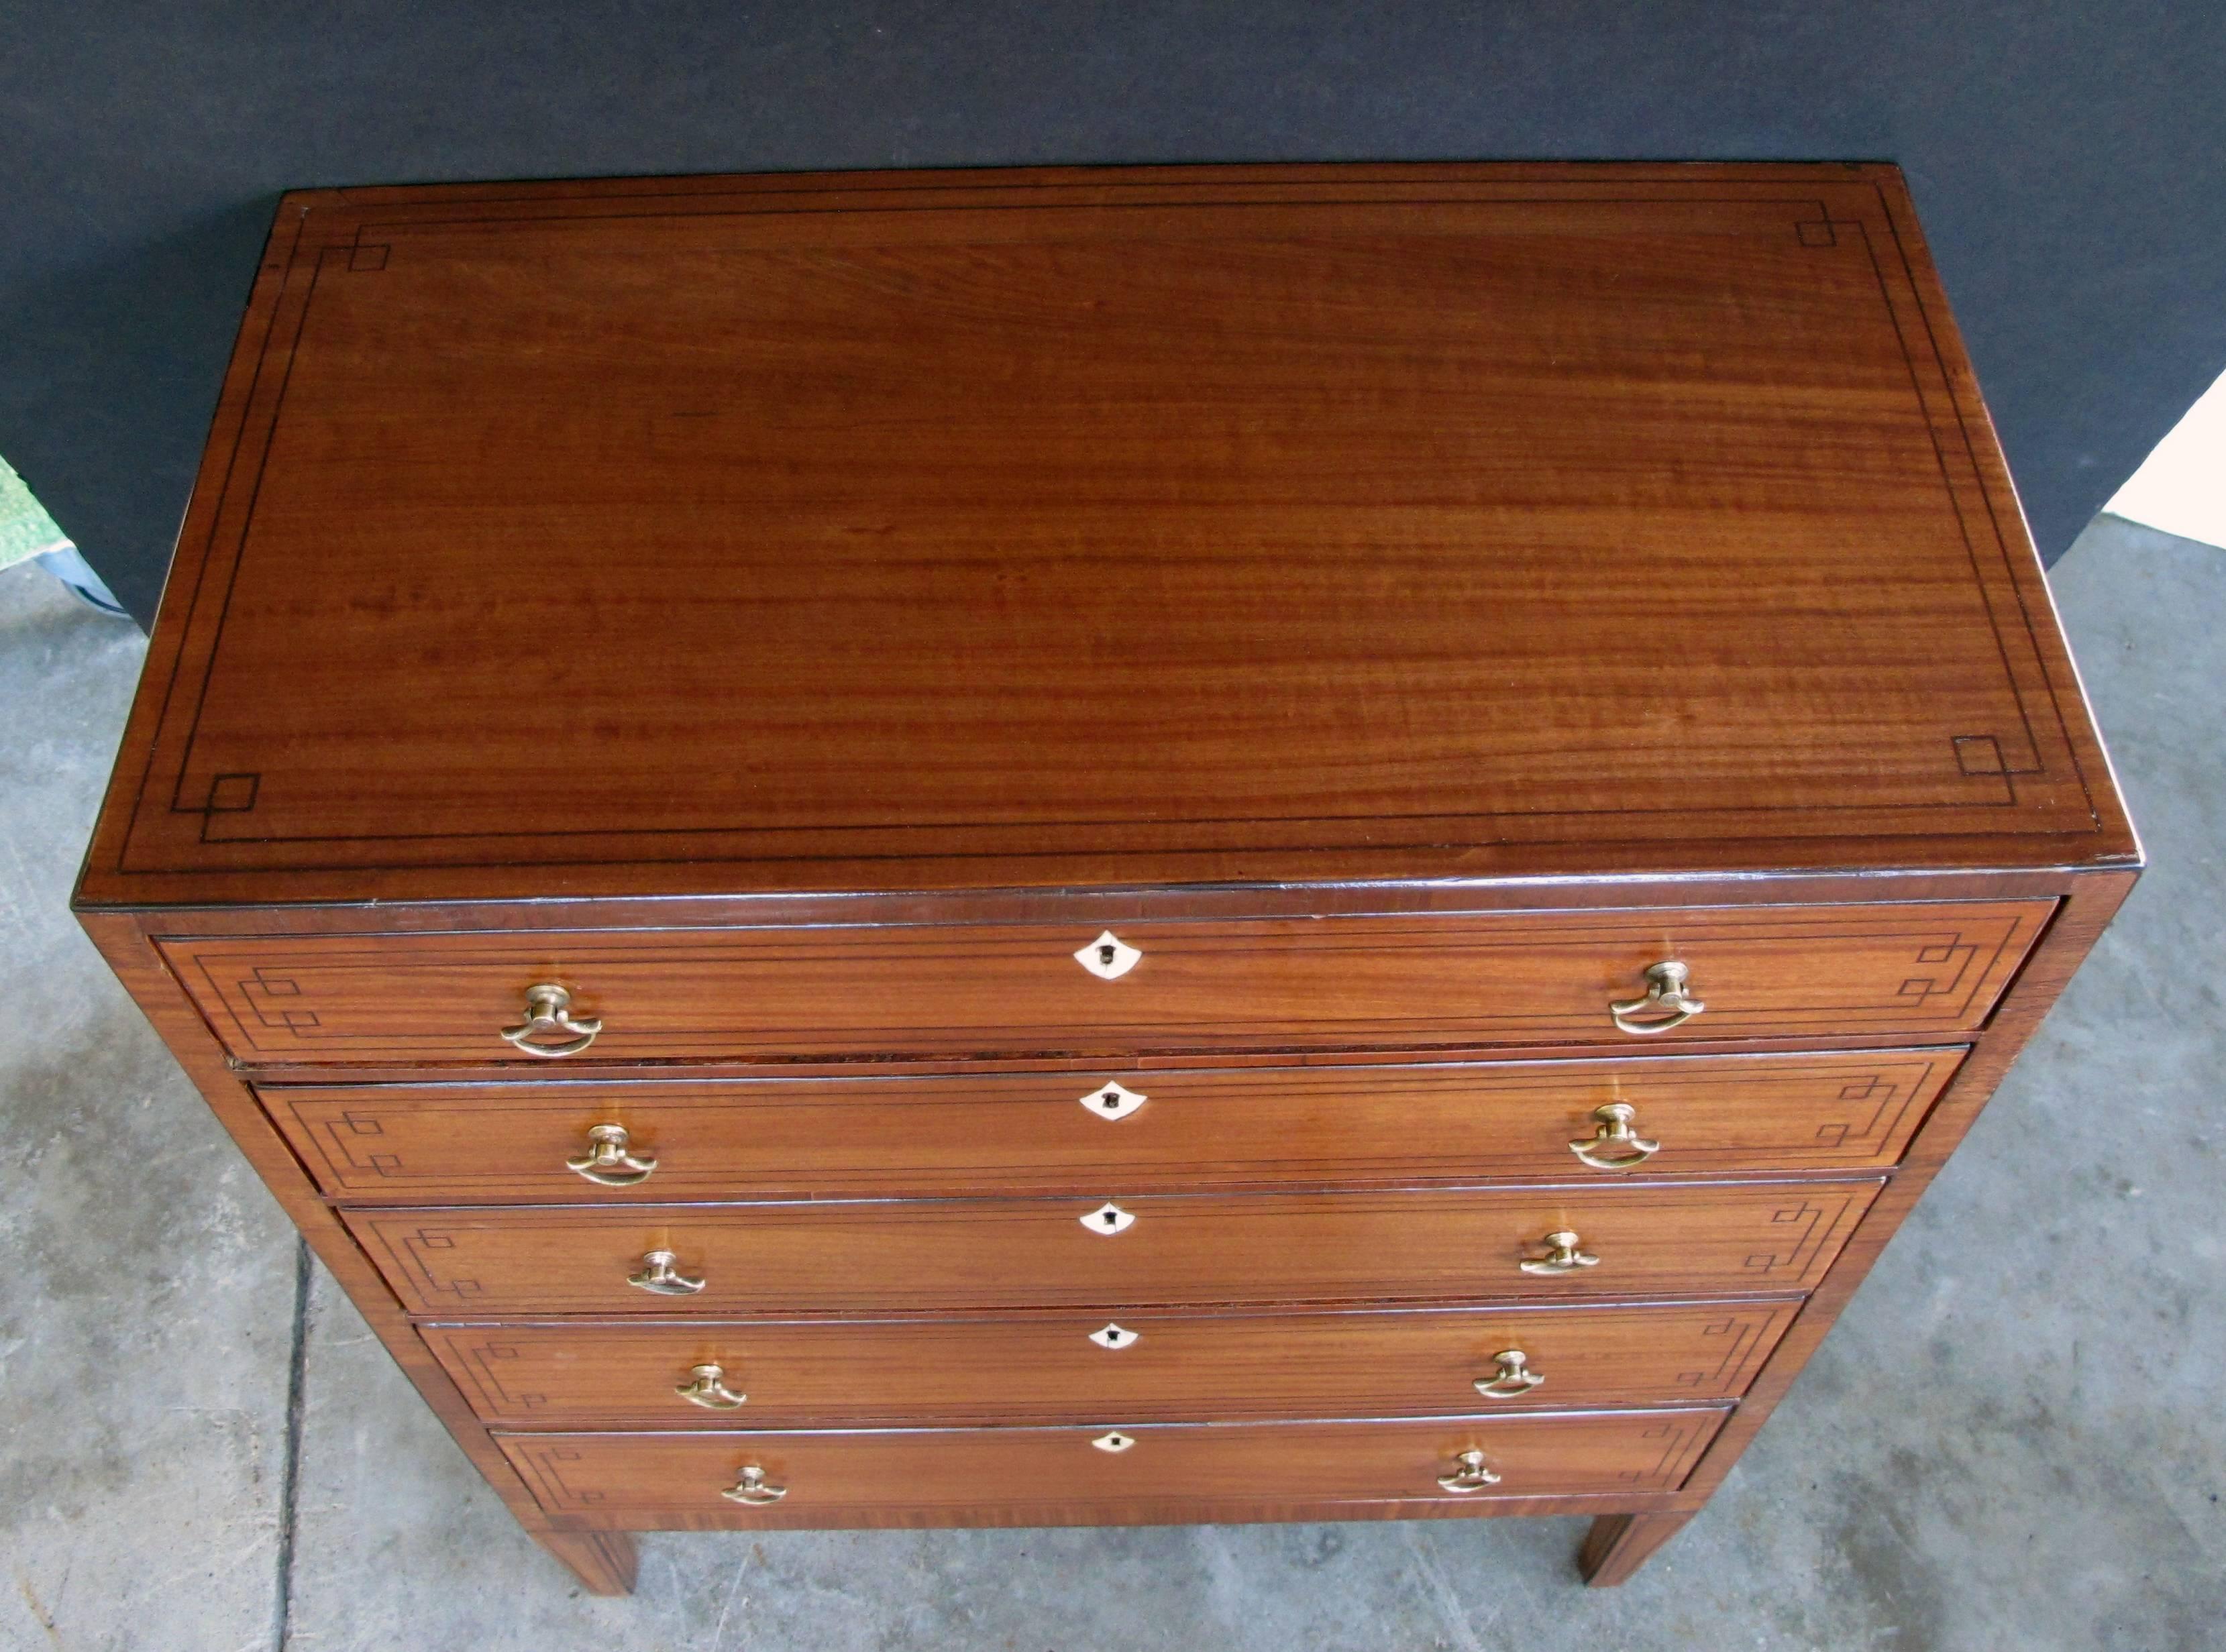 British Tailored Pair of English Edwardian Tiger-Mahogany Five-Drawer Bedside Chests